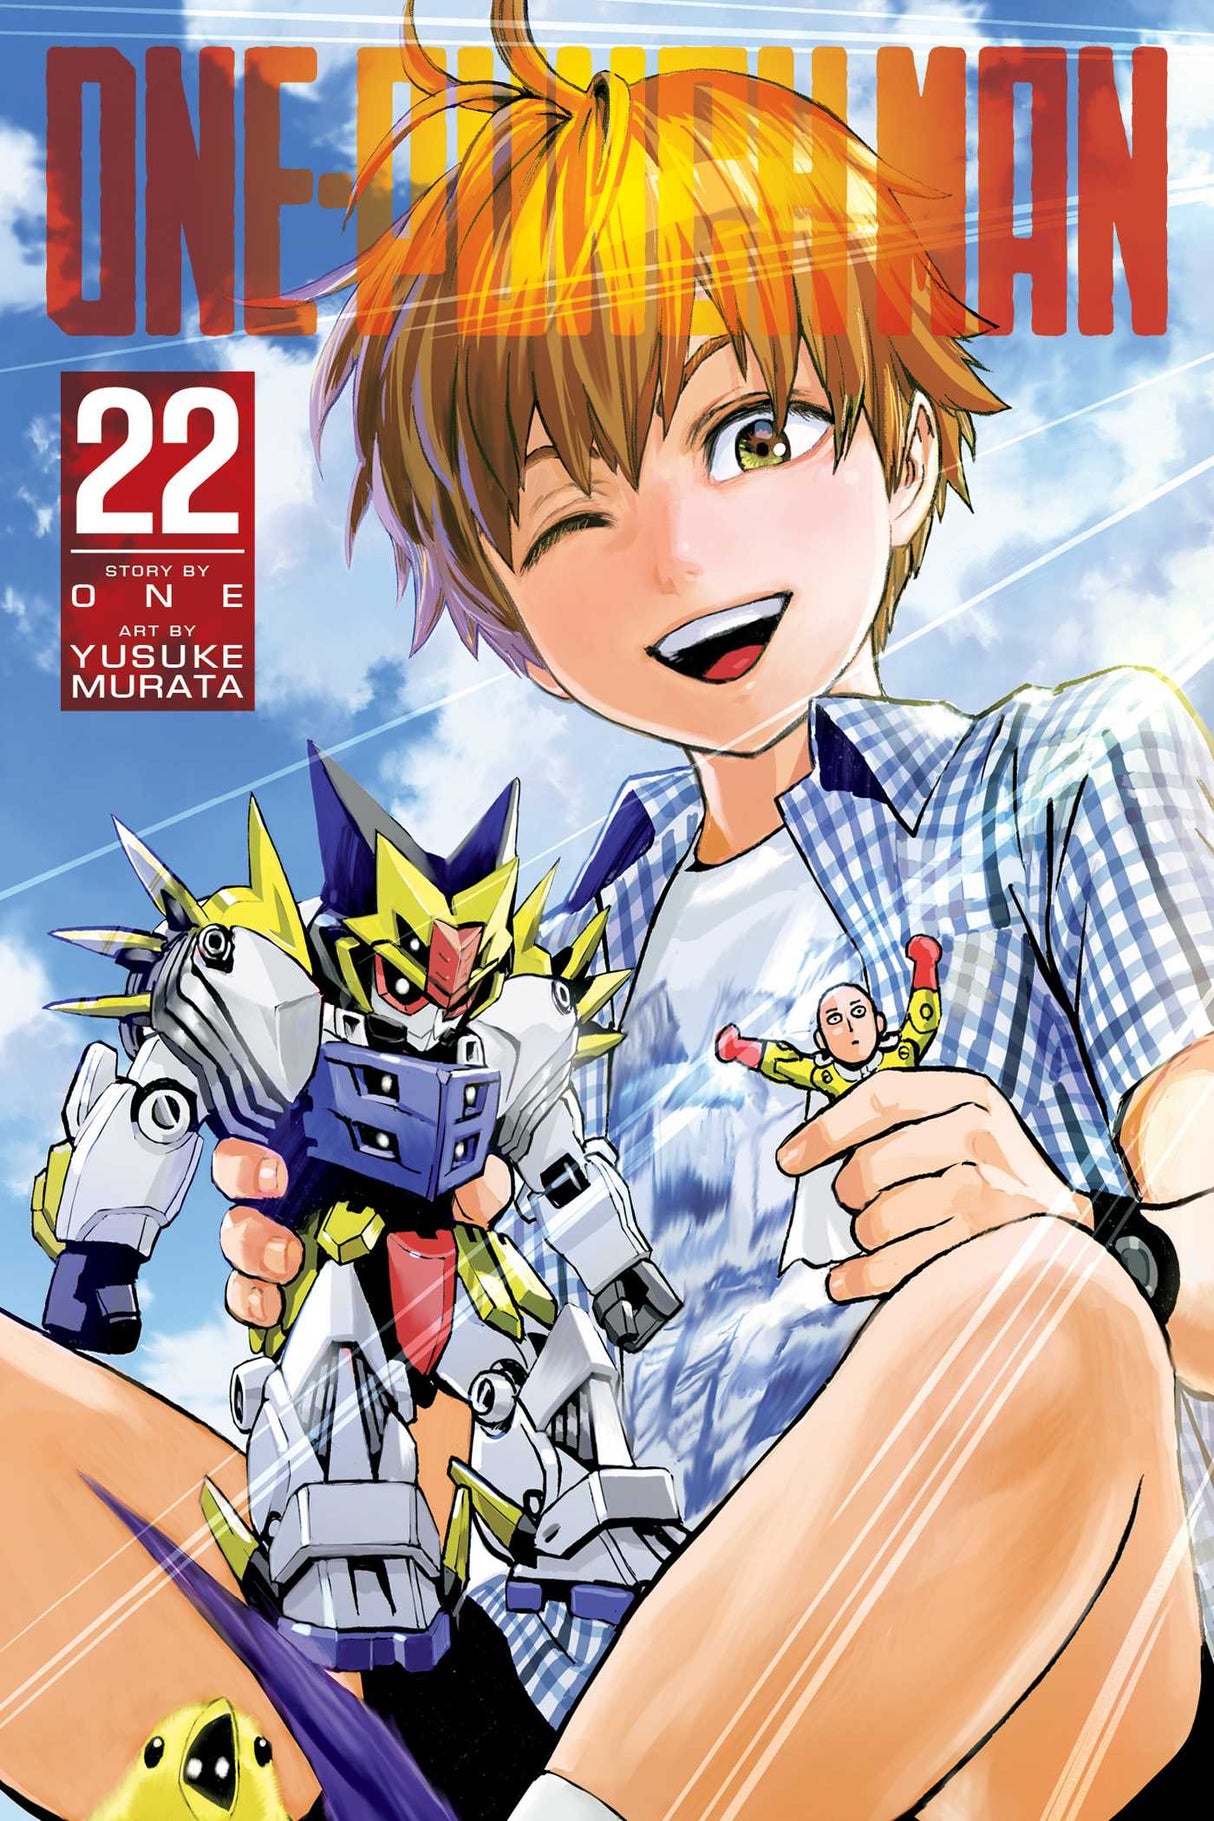 Cover image of the Manga One-Punch-Man-Vol-22